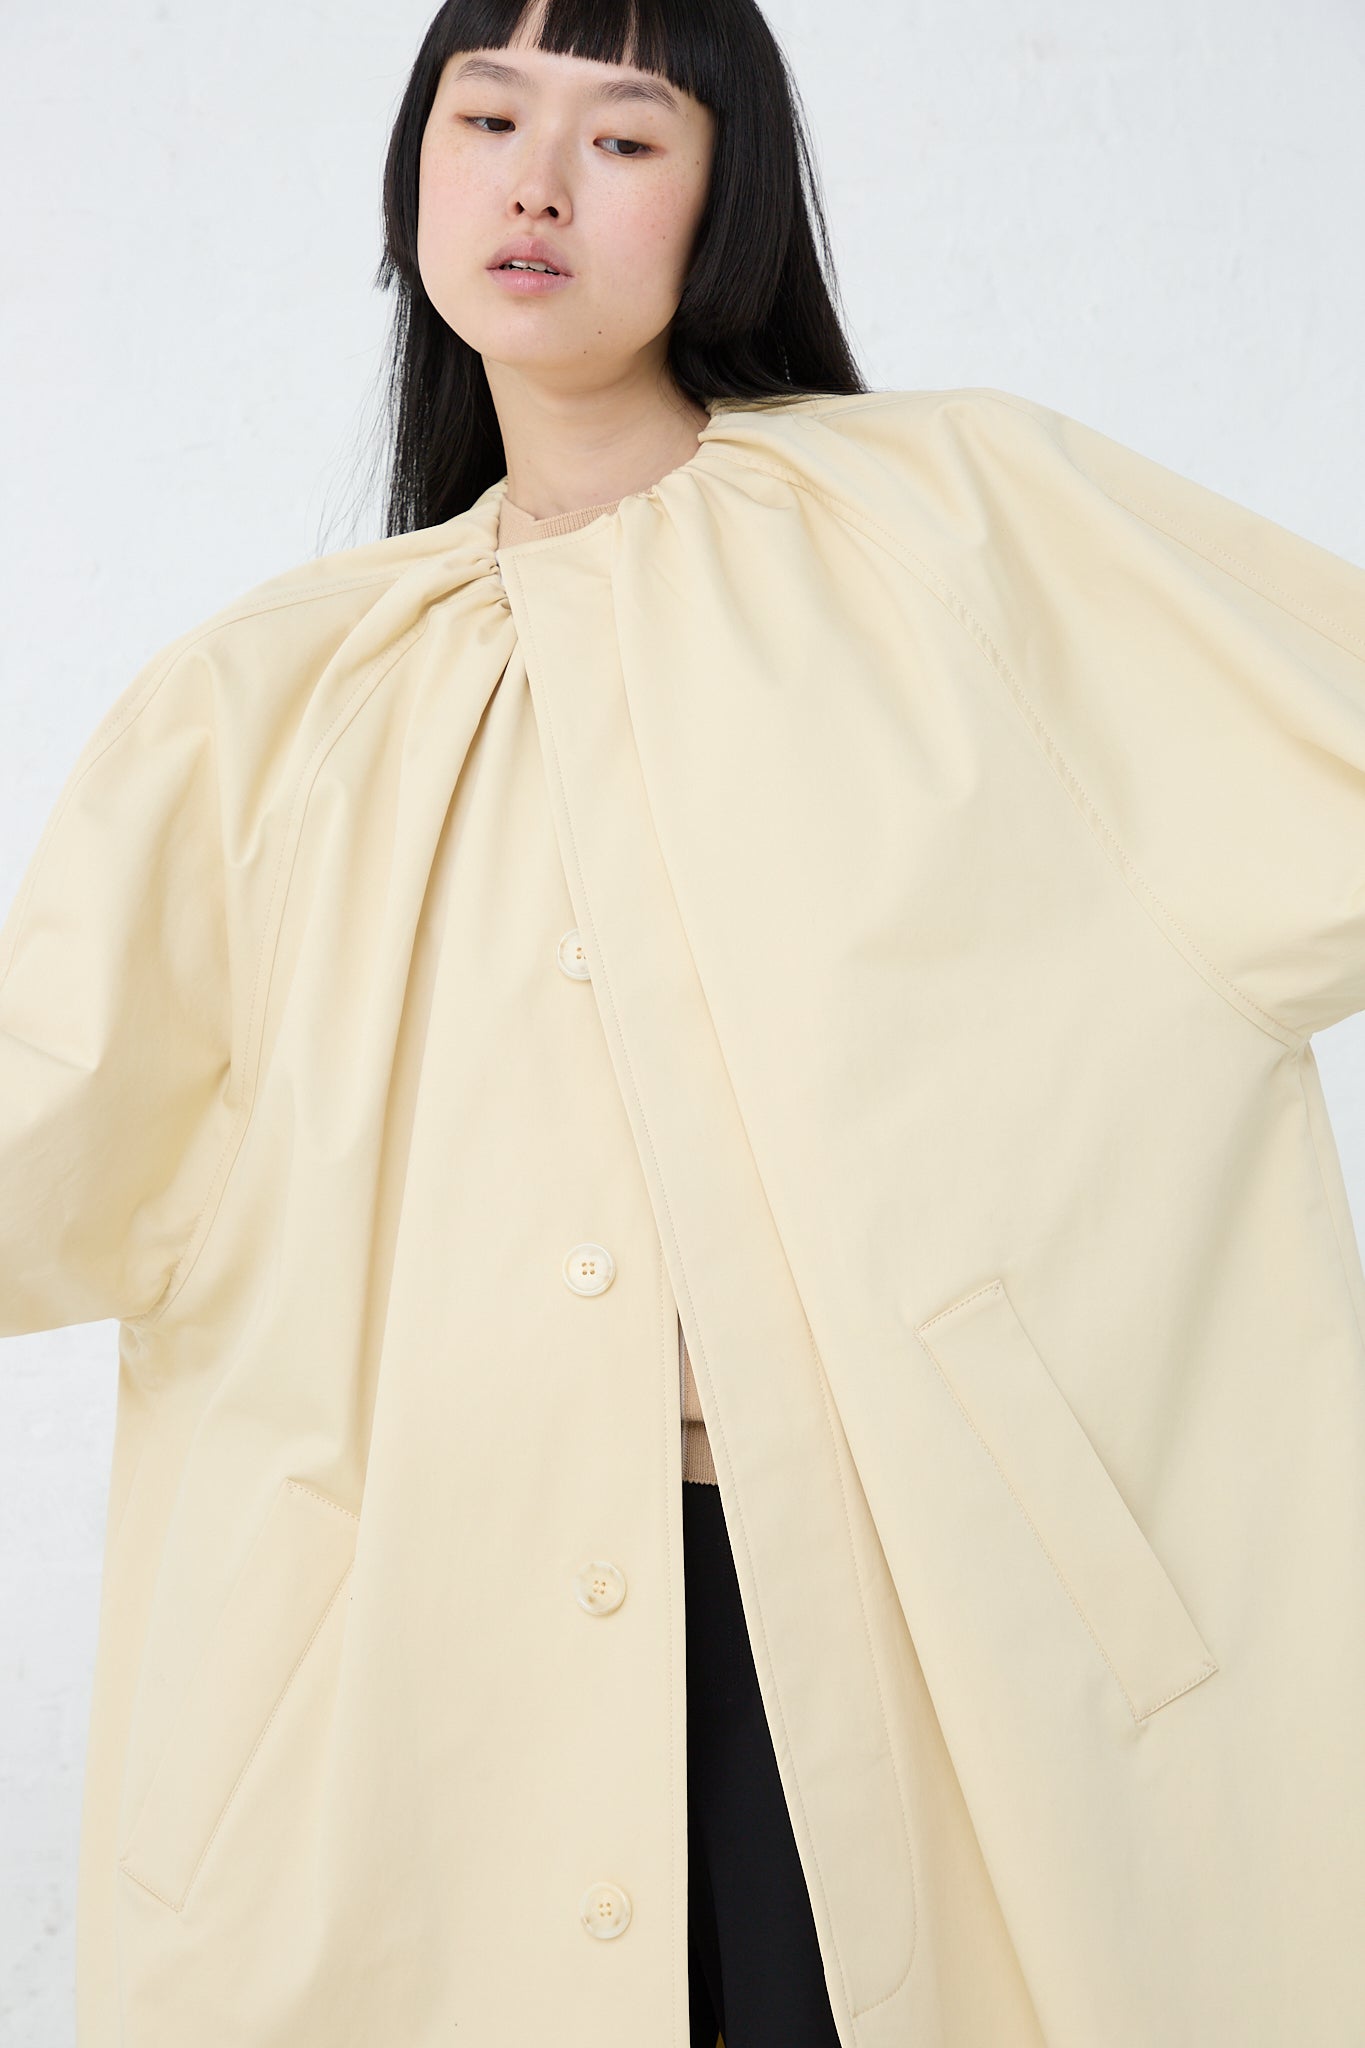 The model is wearing a MM6 collarless trench coat in pale yellow. Front view and coat is closed.